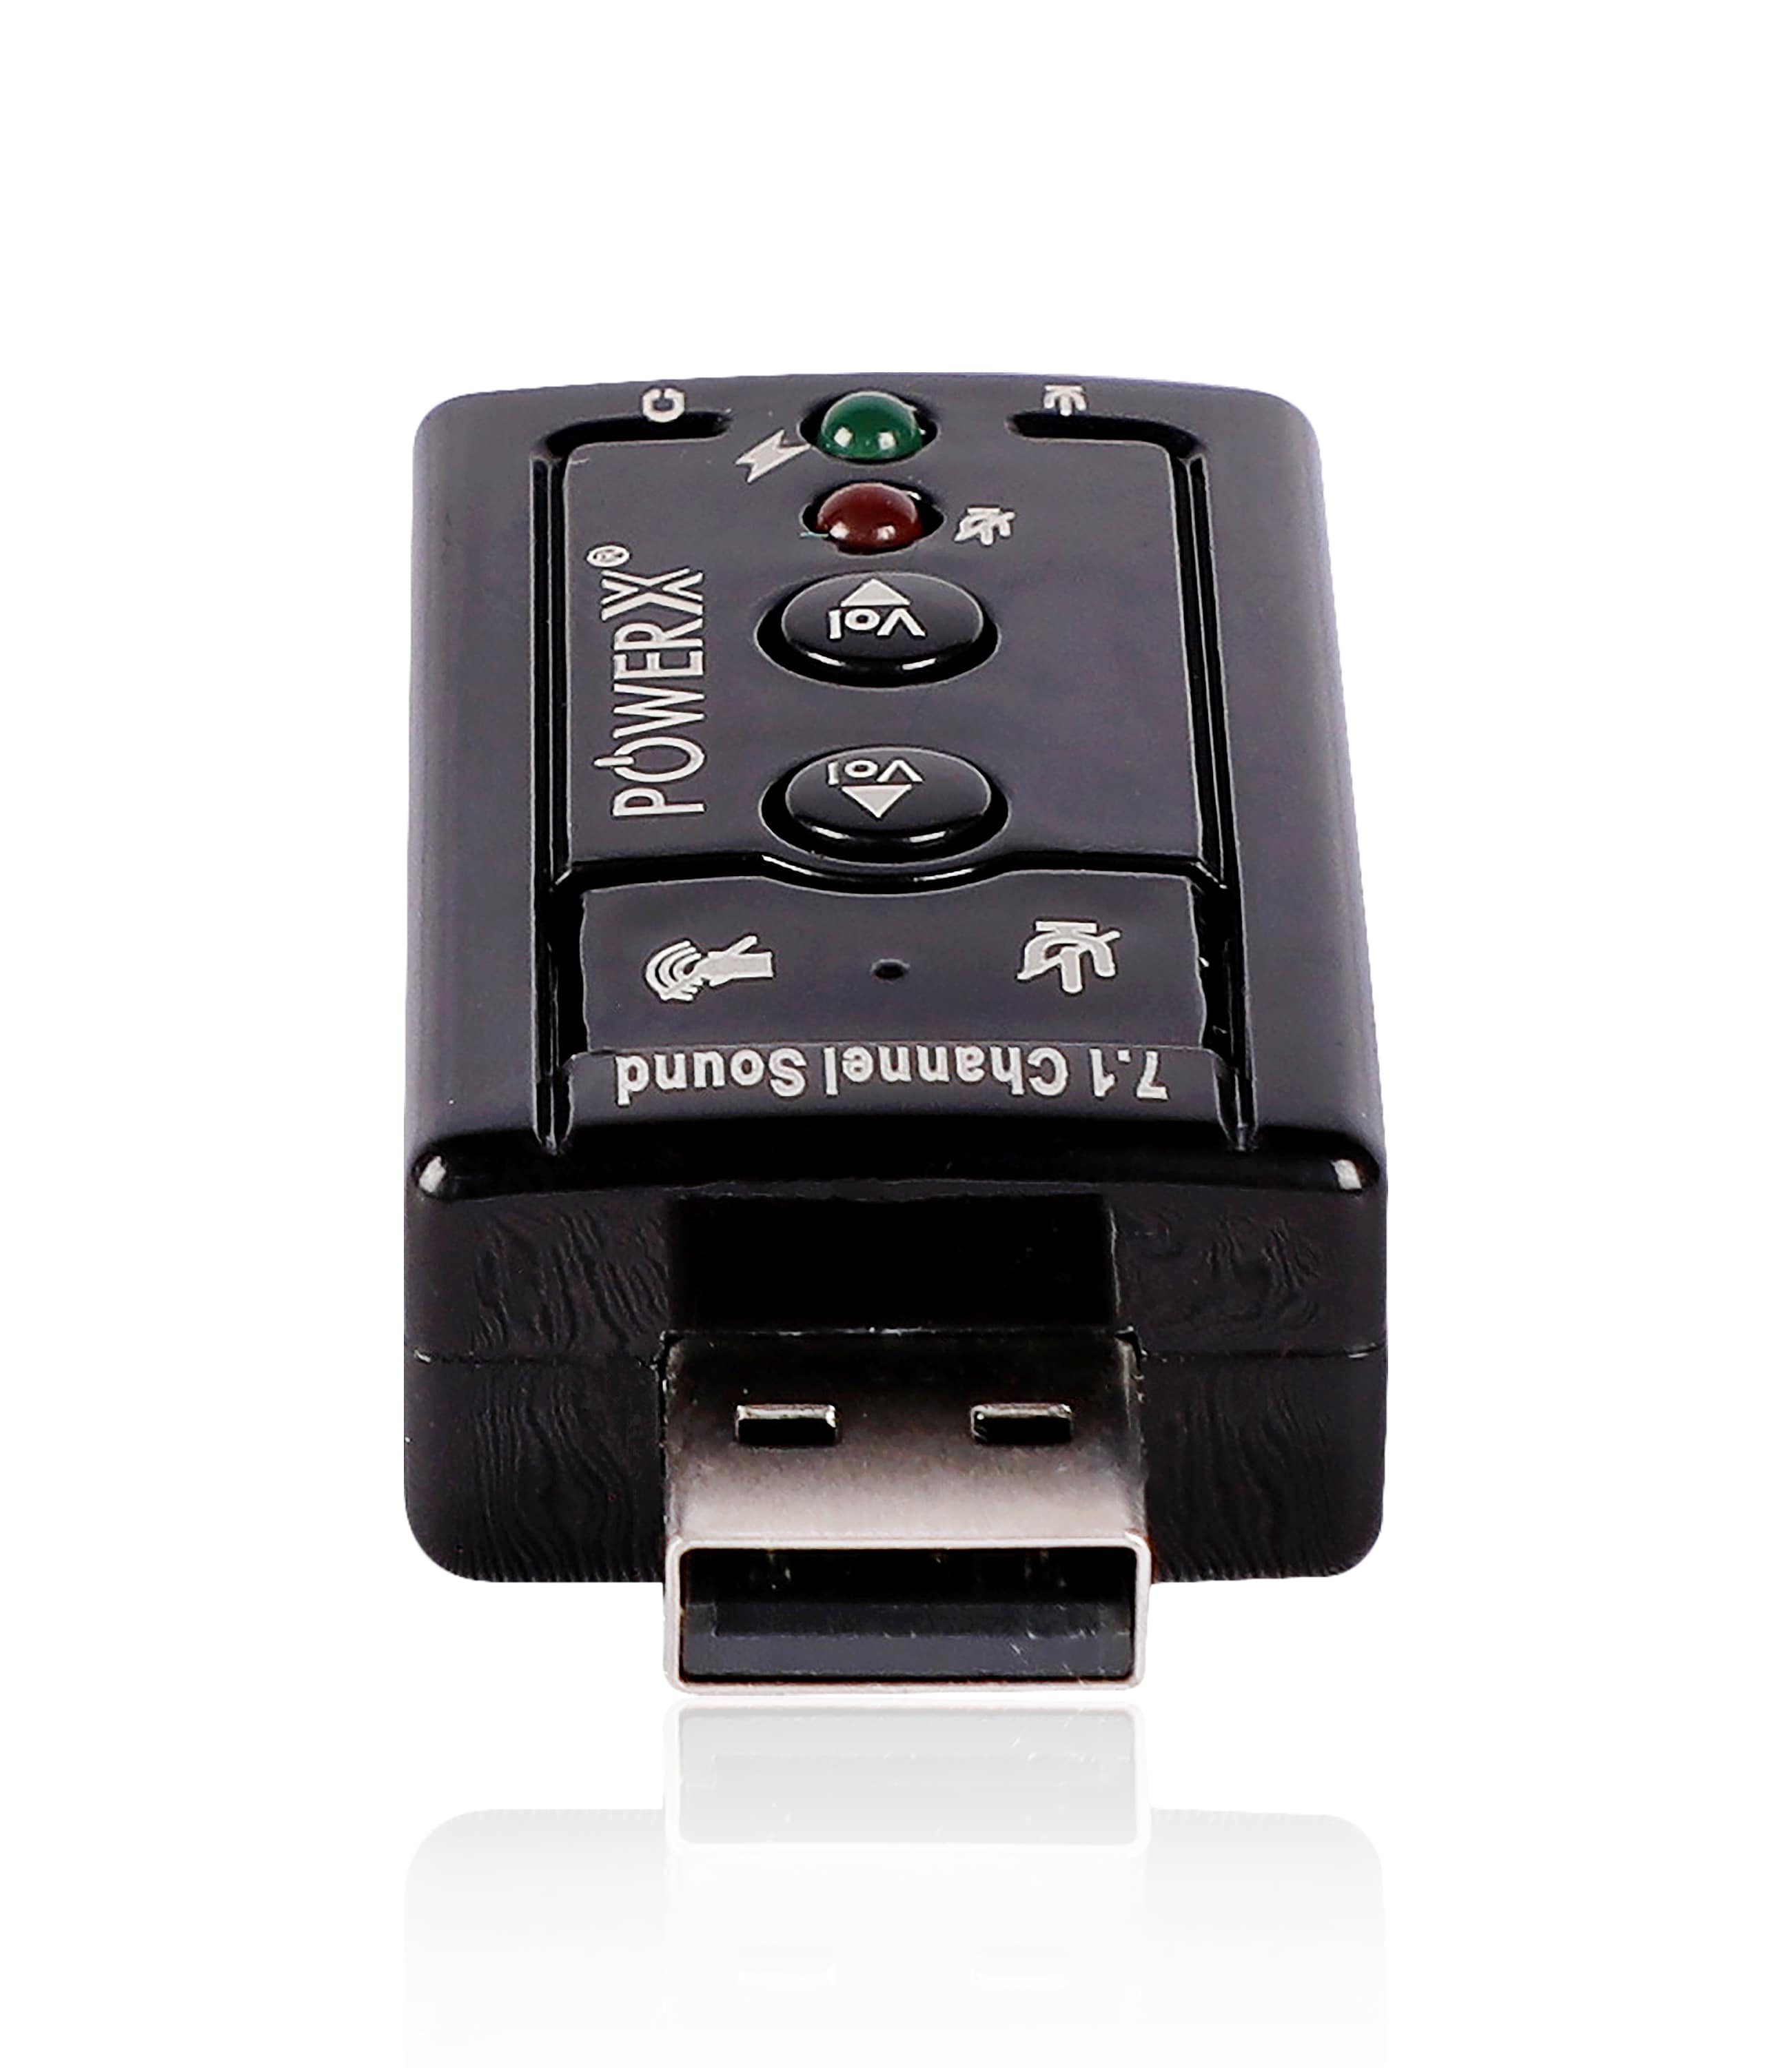 7.1CH USB EXTERNAL SOUND CARD ADAPTER WITH MIC